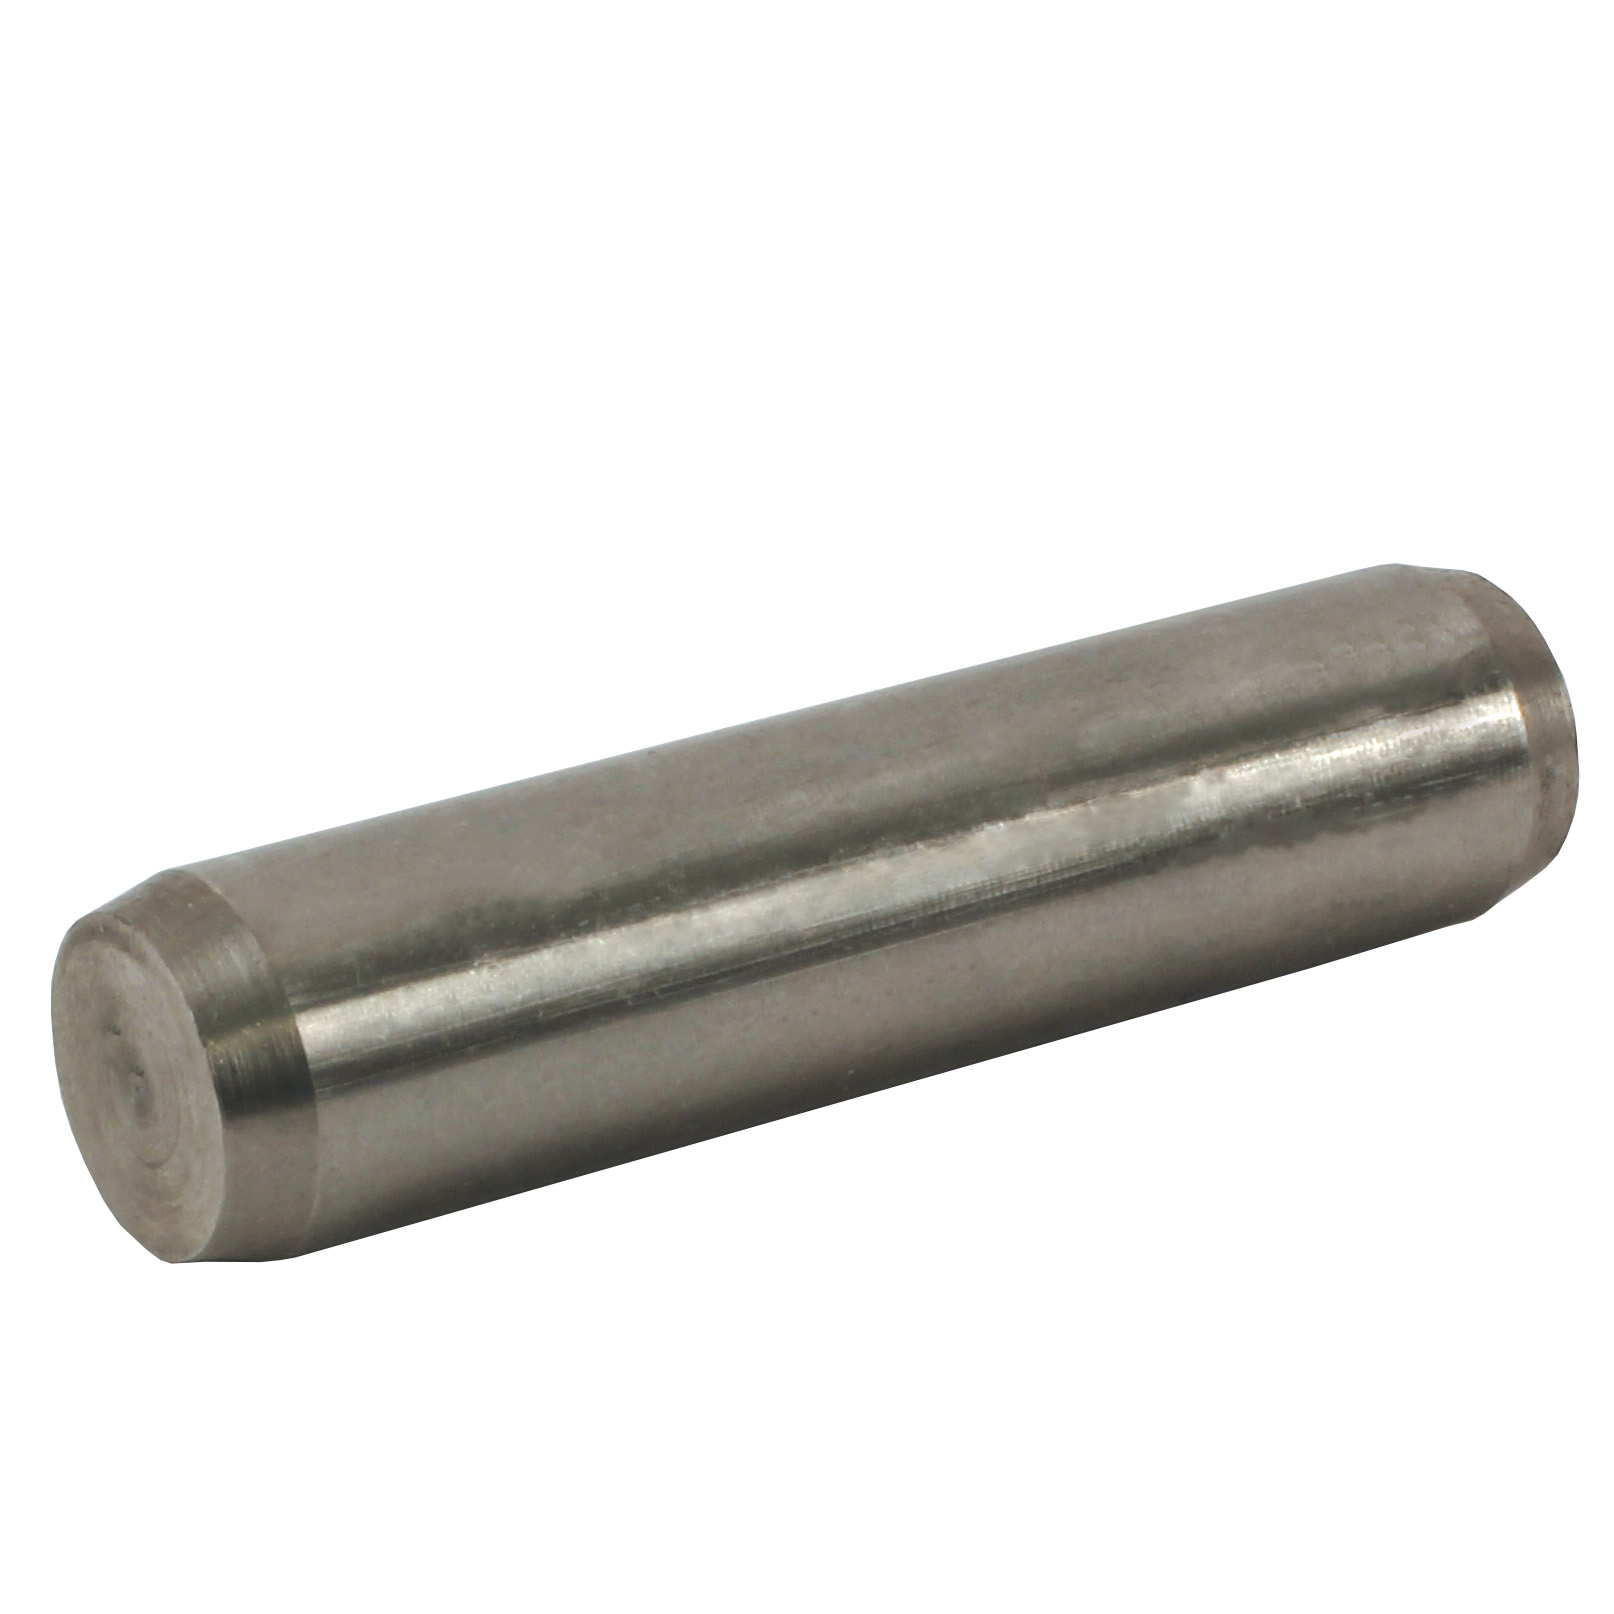 Dowel pin - Solid ISO 2338 - Stainless steel 303 - 